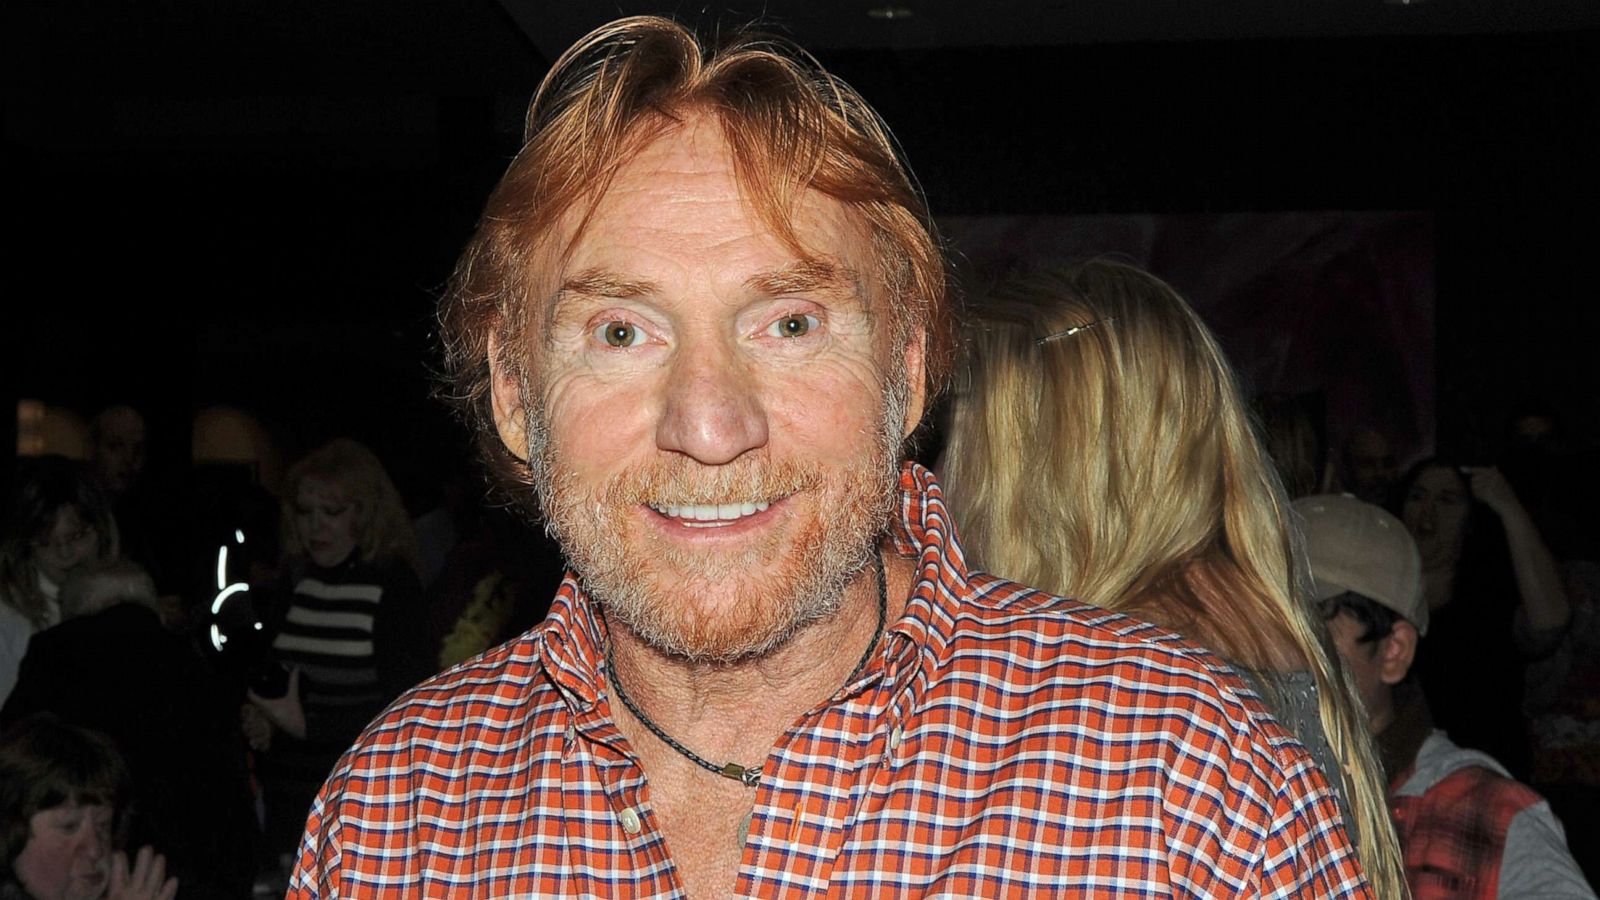 Danny Bonaduce opens up about mystery illness that he 1st believed was a  stroke - ABC News